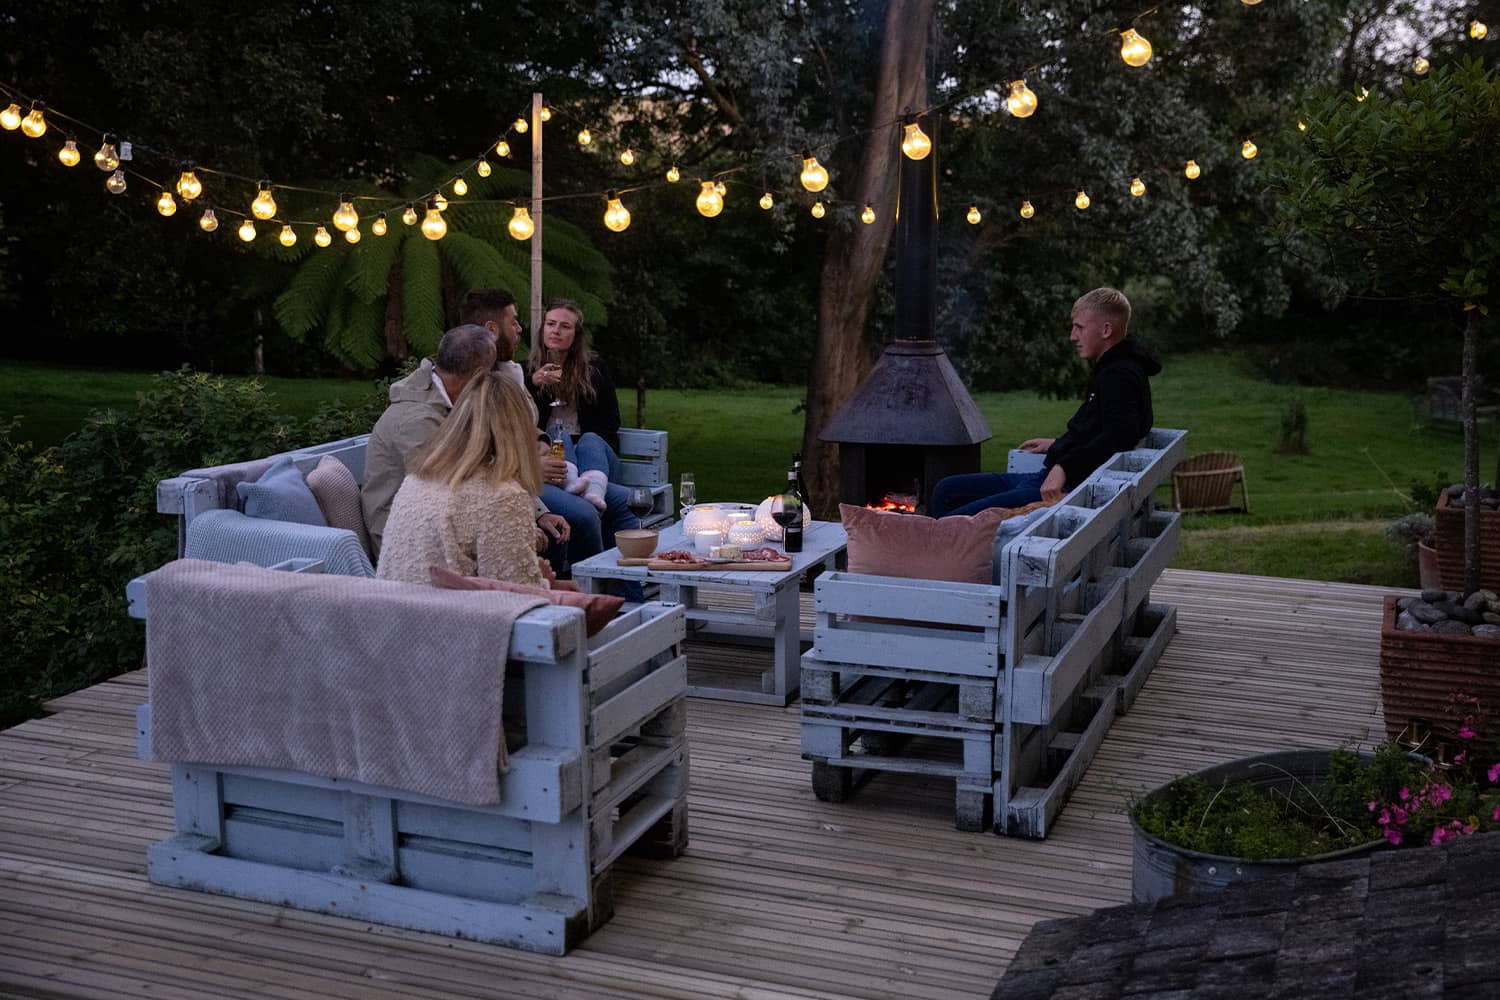 Making the most of your garden decking in the autumn evenings